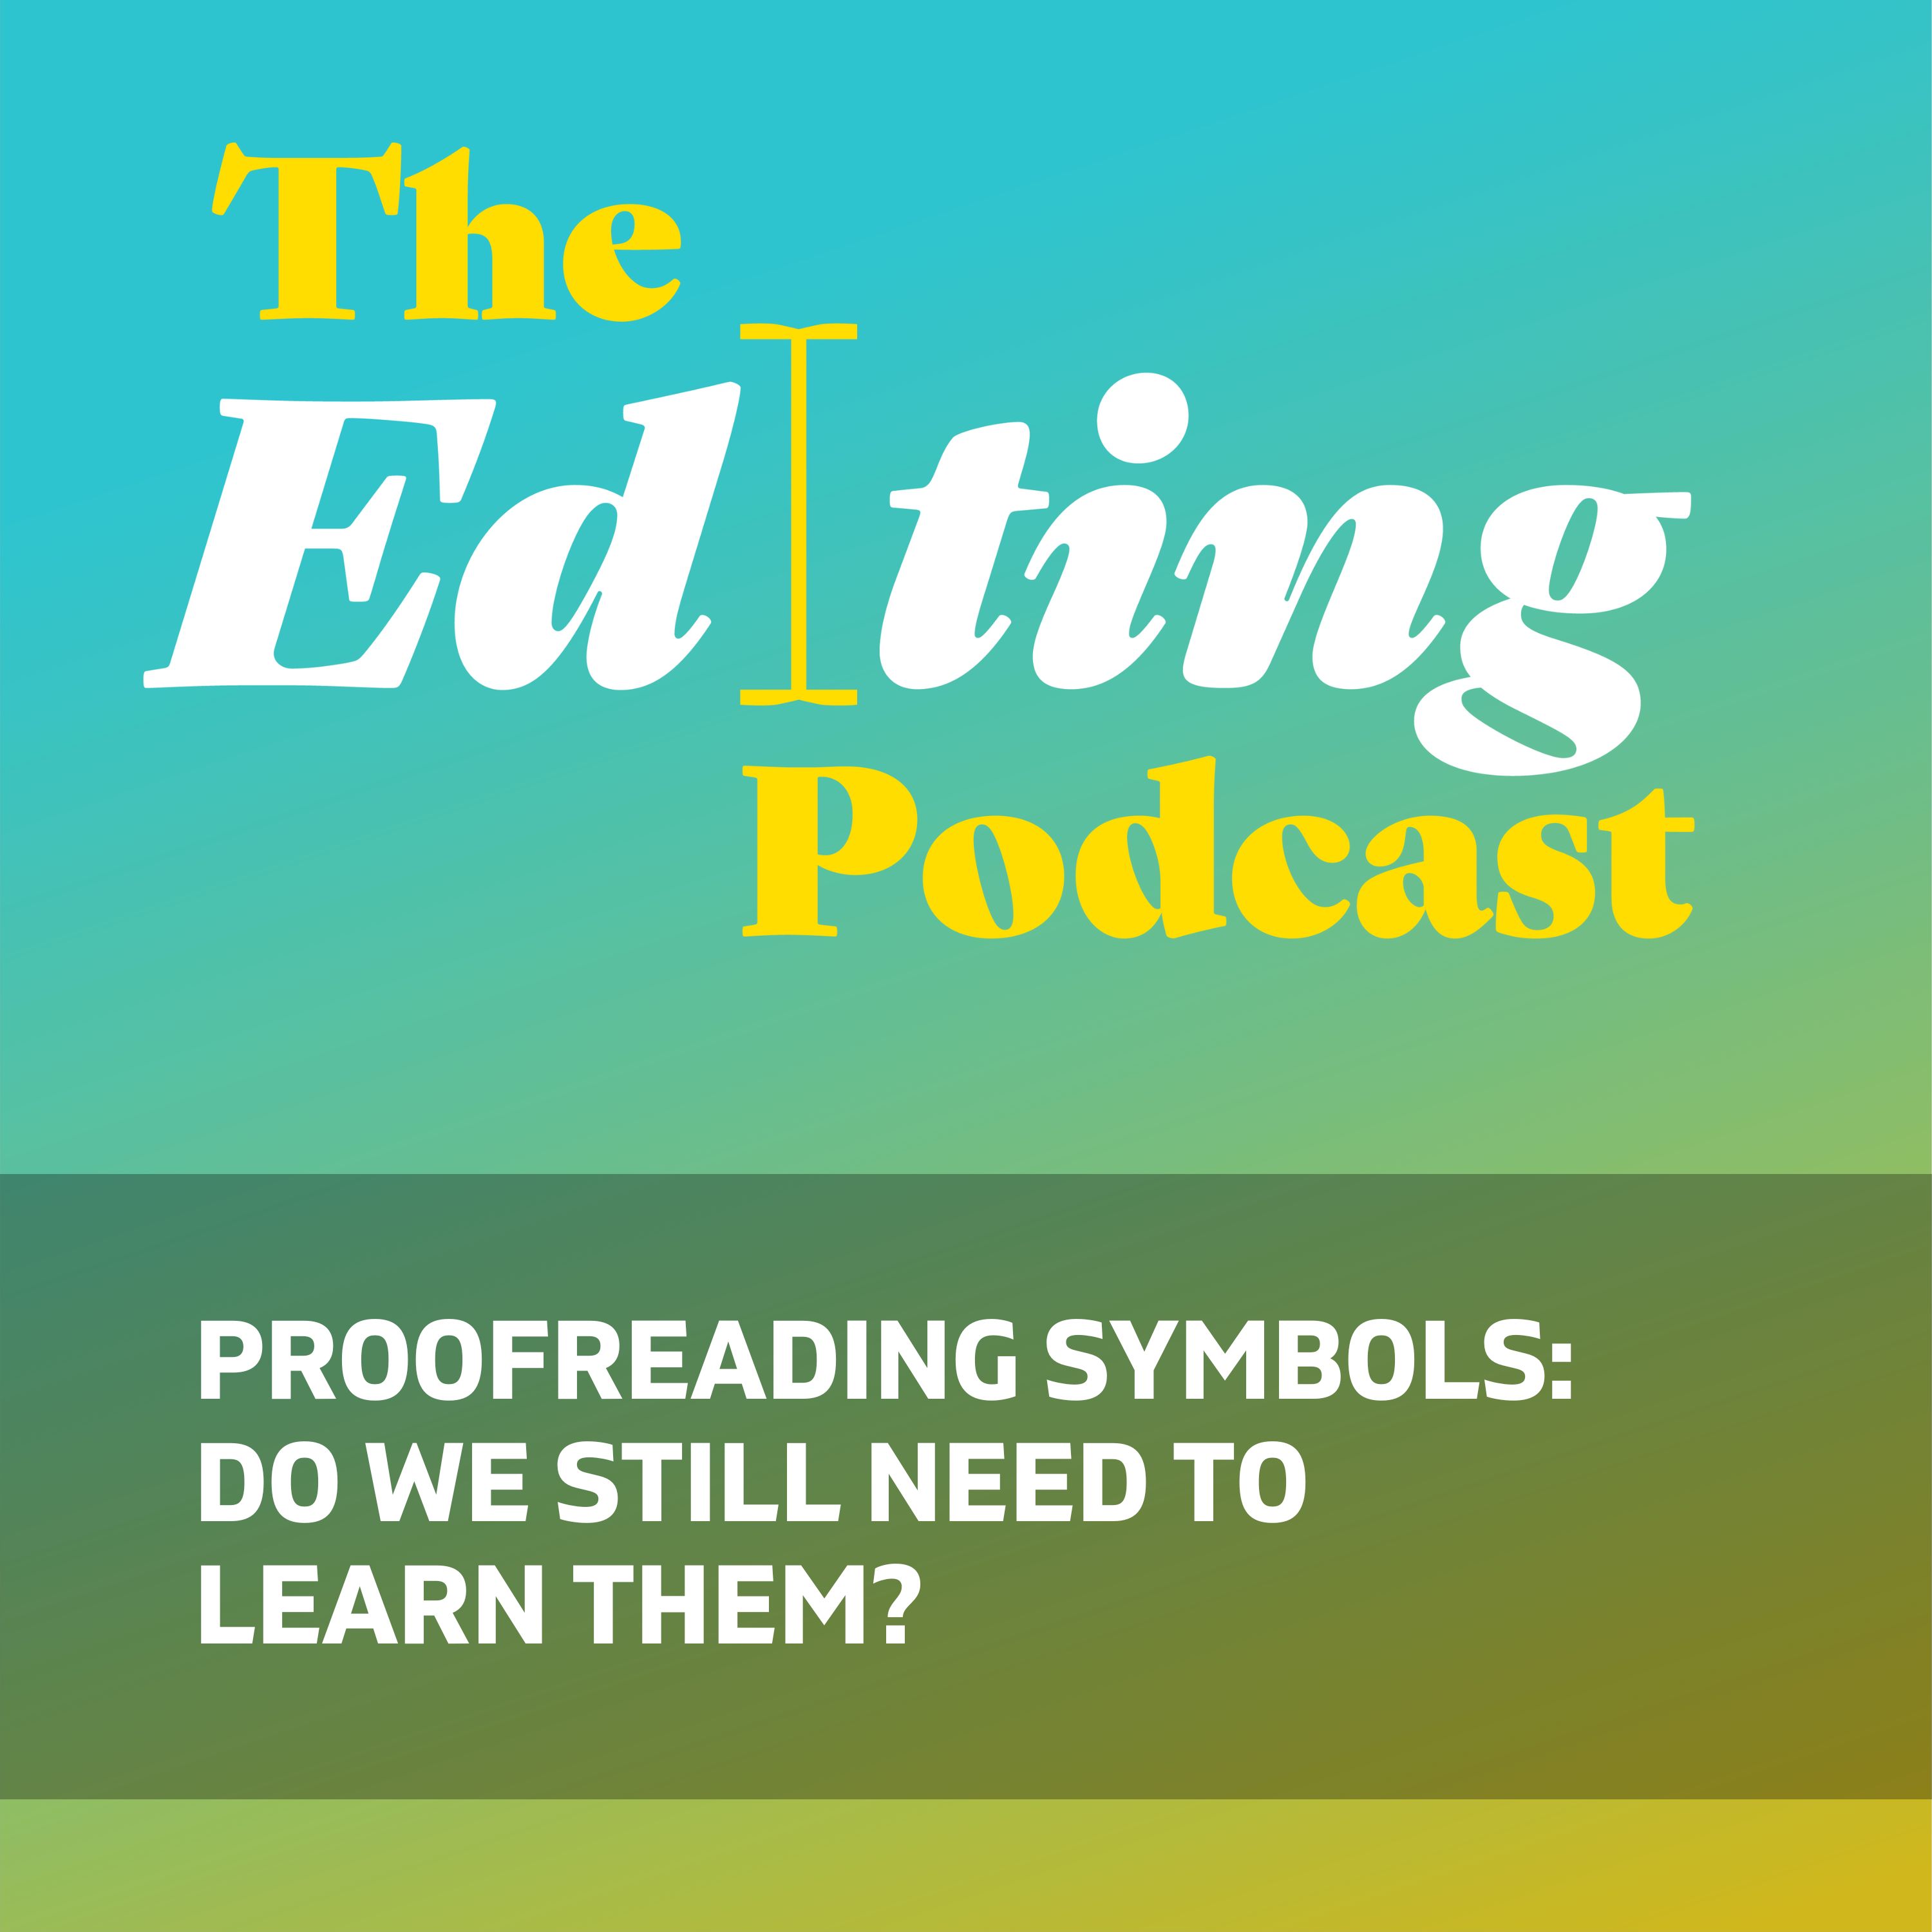 Proofreading symbols: Do we still need to learn them?